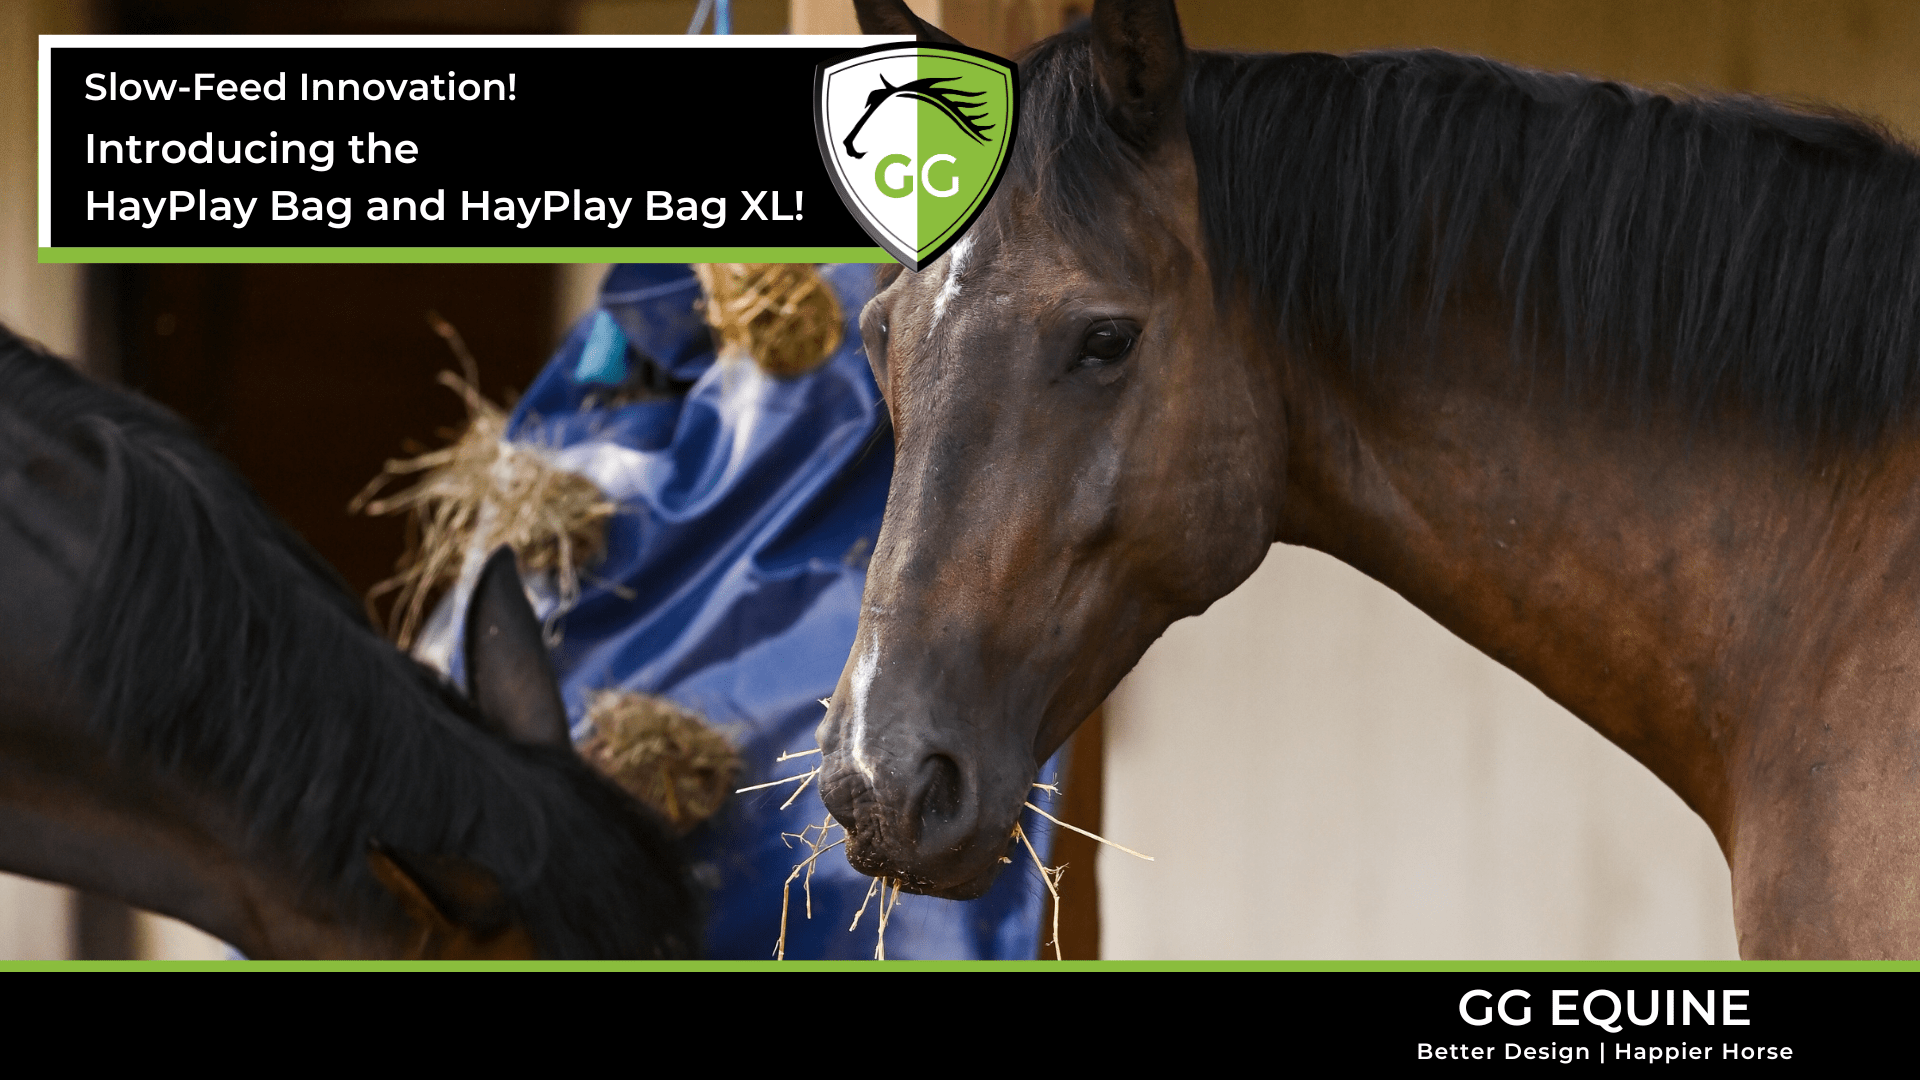 Cargar vídeo: An introductory look at the features of the HayPlay Bag slow-feeders for horses.